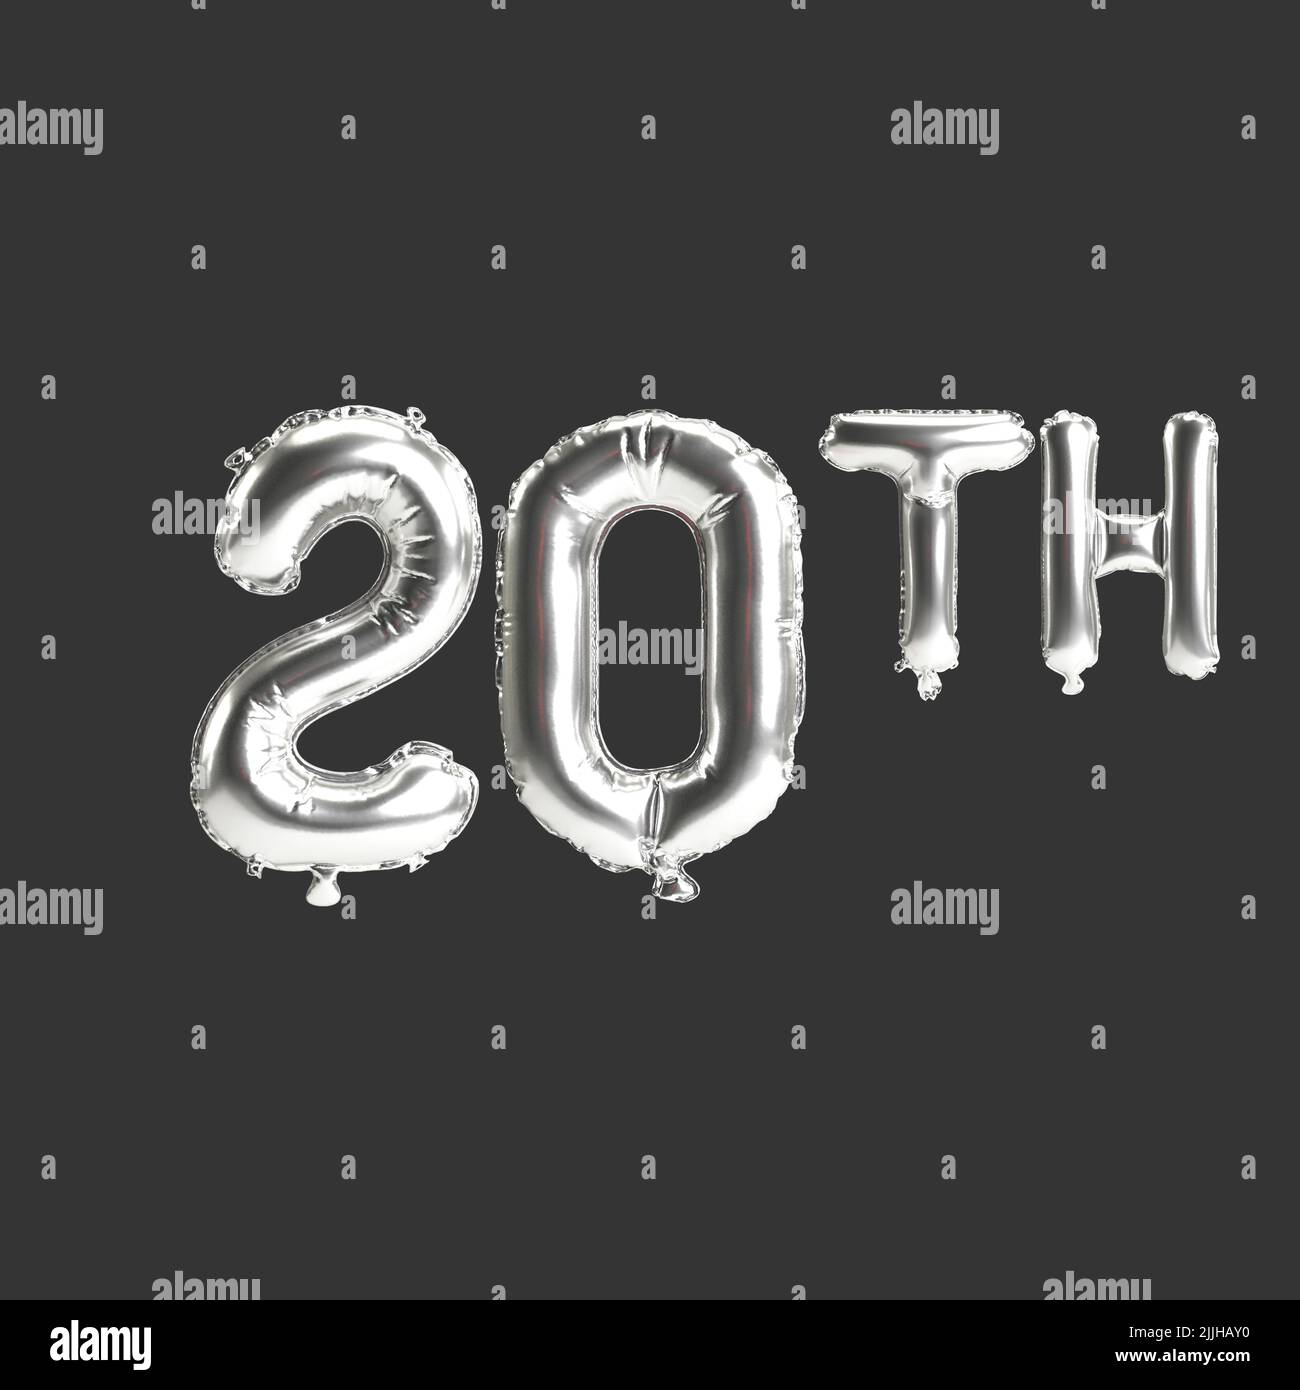 3d illustration of 20th silver balloons isolated on dark background Stock Photo